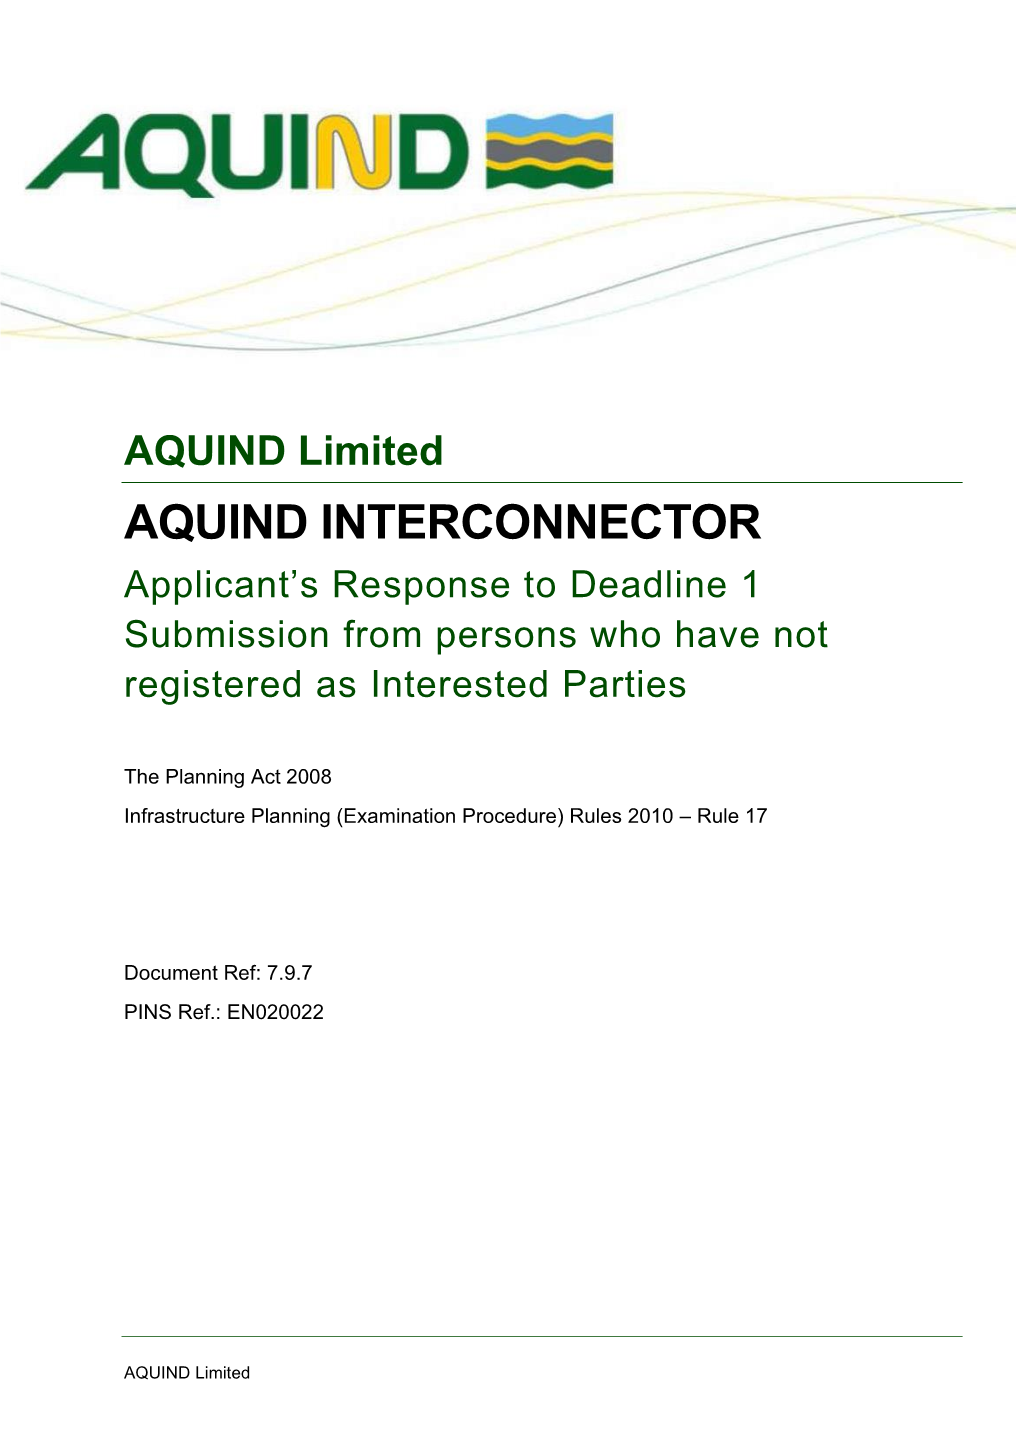 AQUIND INTERCONNECTOR Applicant’S Response to Deadline 1 Submission from Persons Who Have Not Registered As Interested Parties